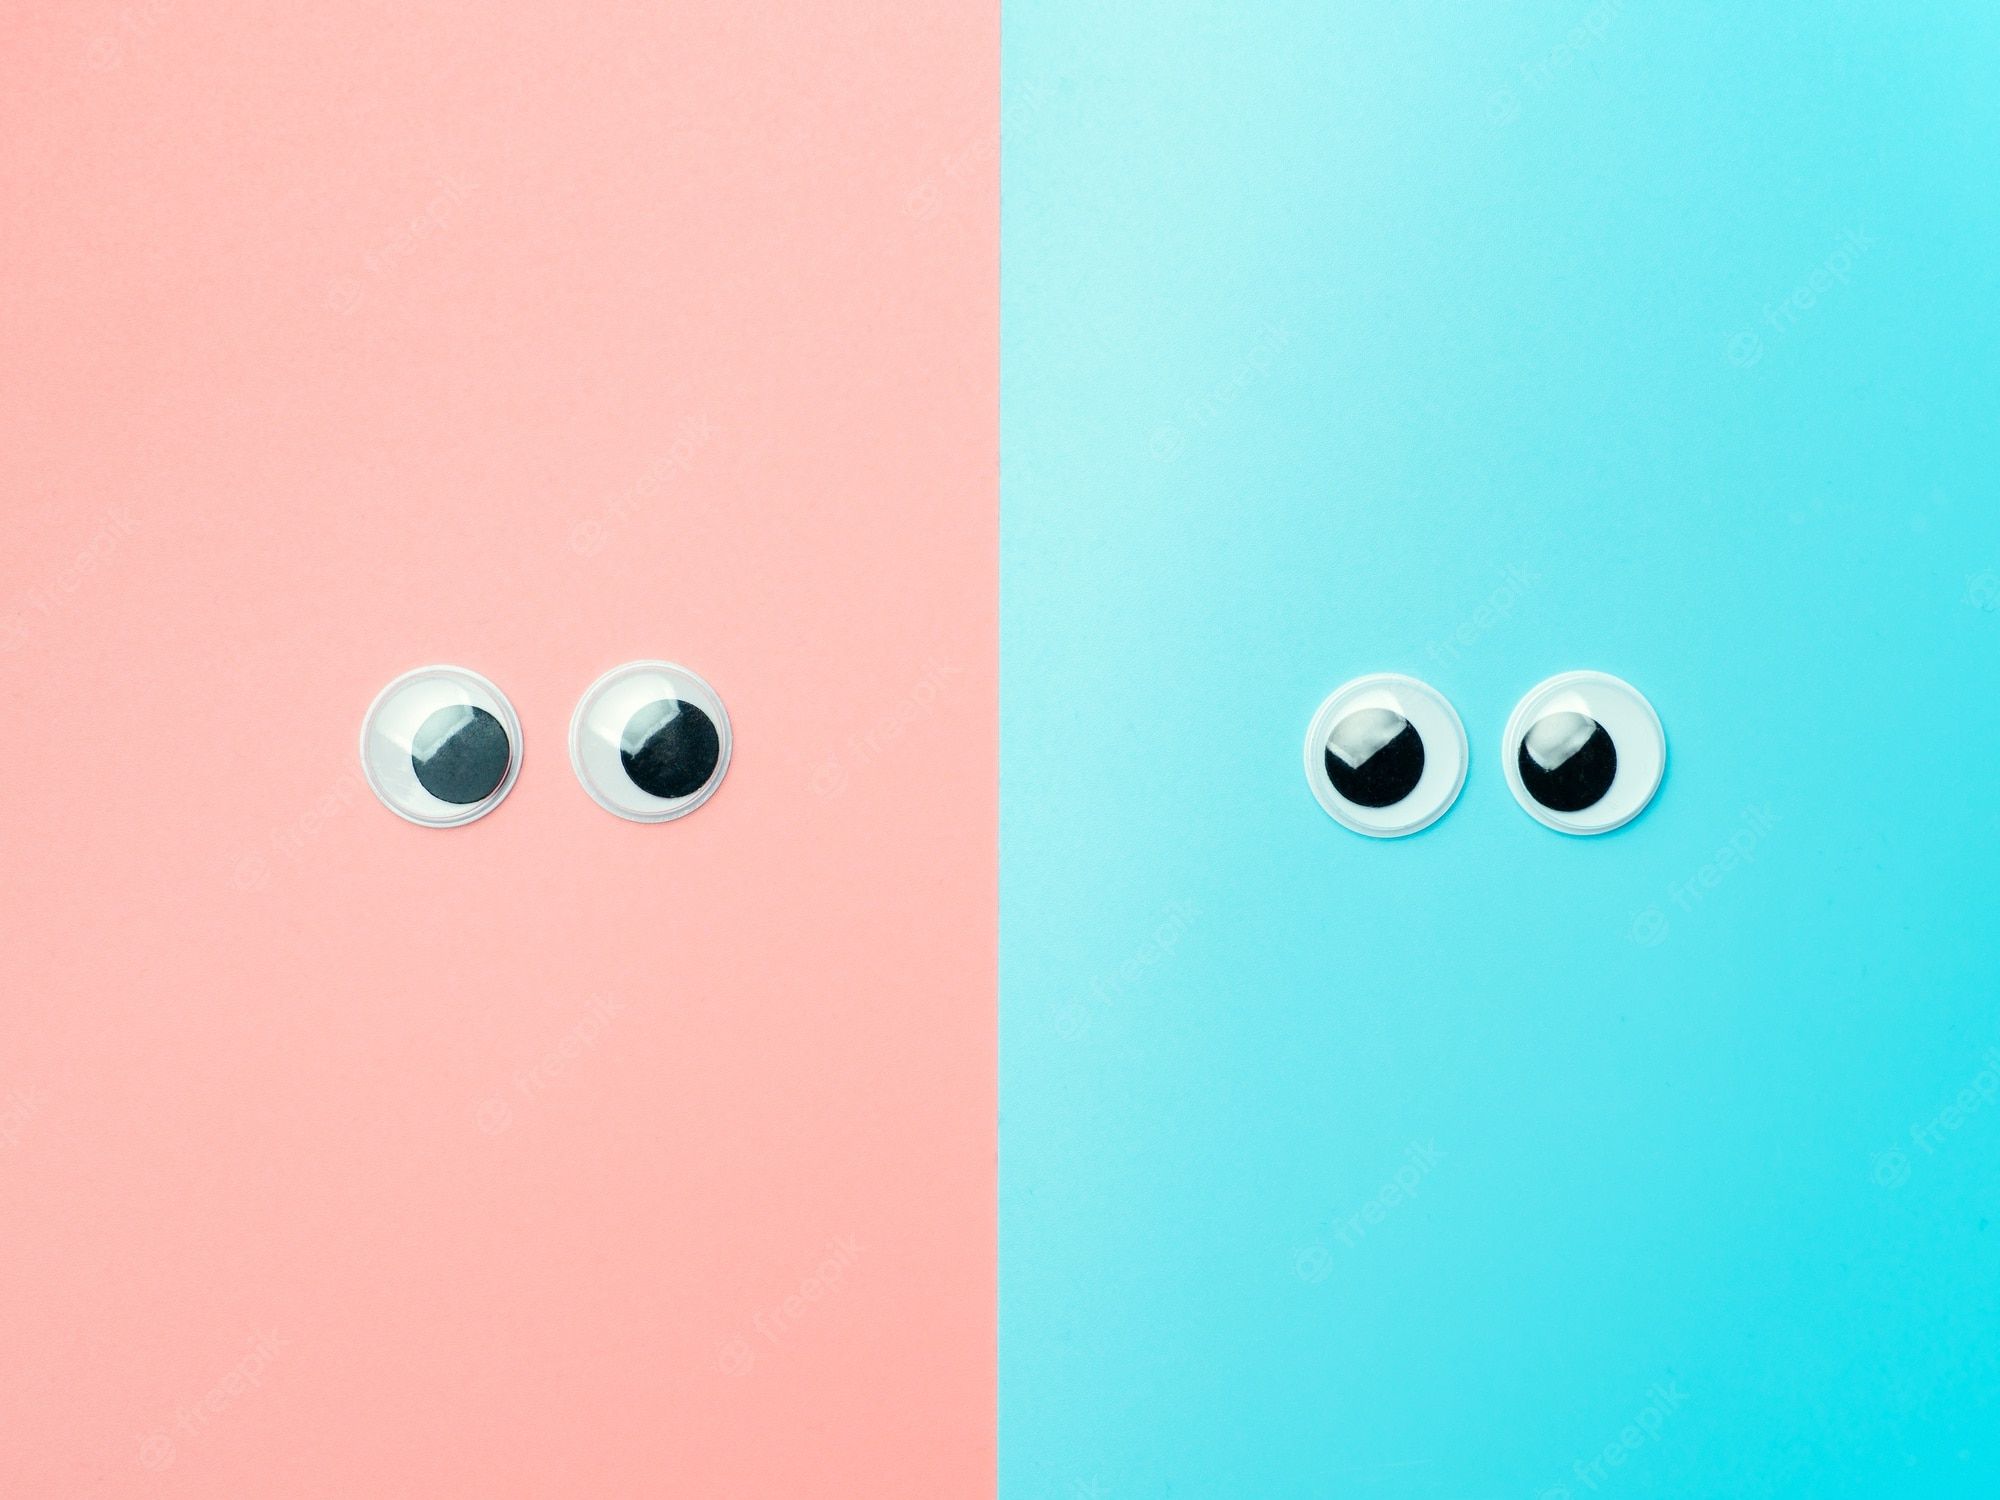 Premium Photo. Googly eyes on blue an pink background. top view or flat lay. plastic toy eyes on turquoise background